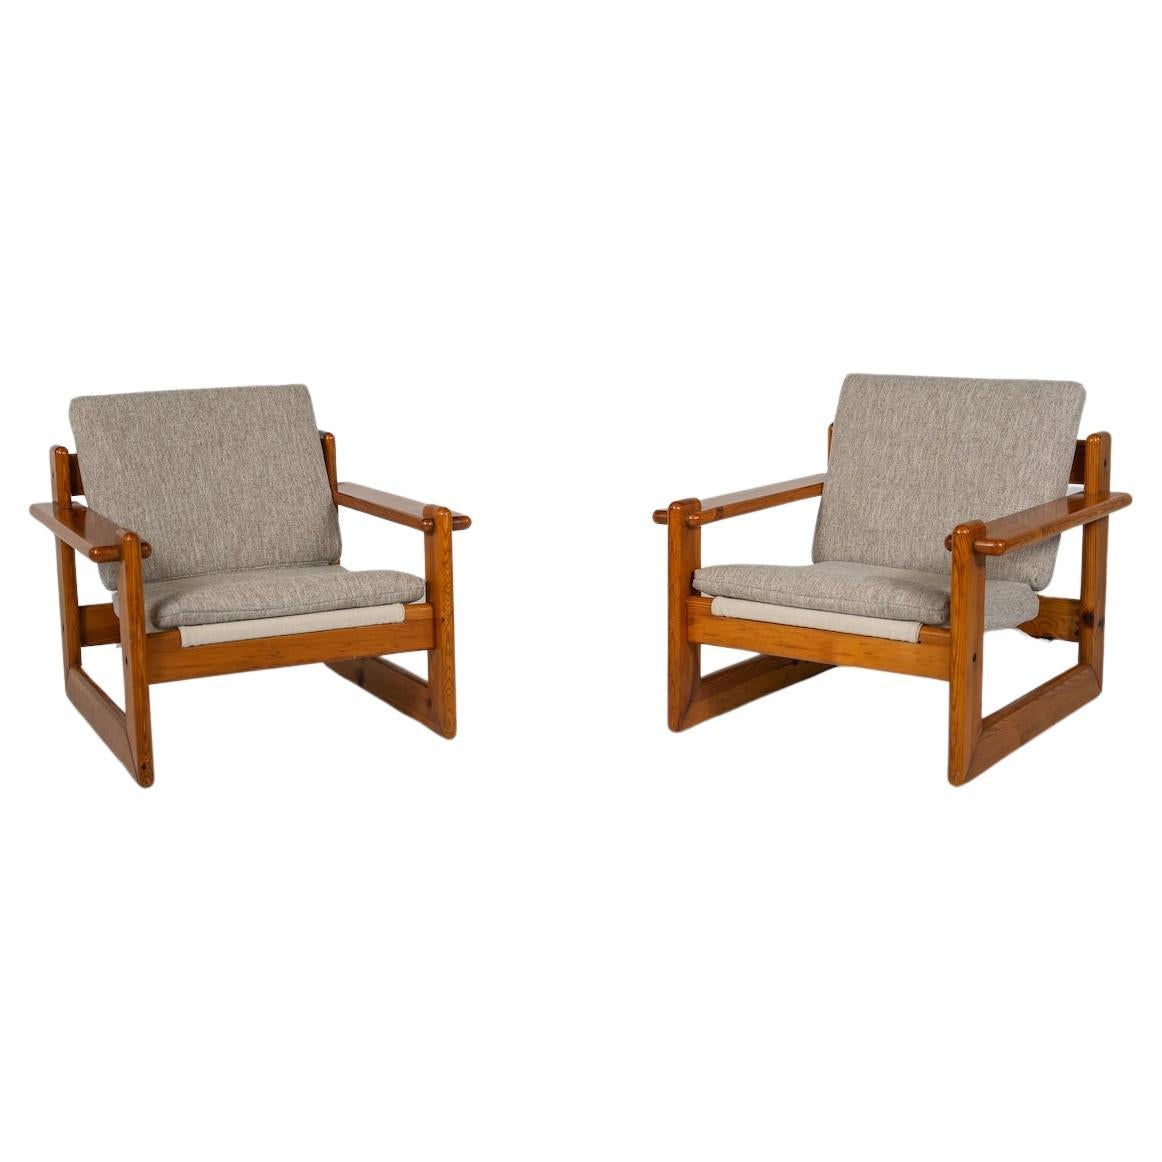 Mid-Century Modern Pair of Lounge Chairs, Wood and Fabric, Italy, 1970s